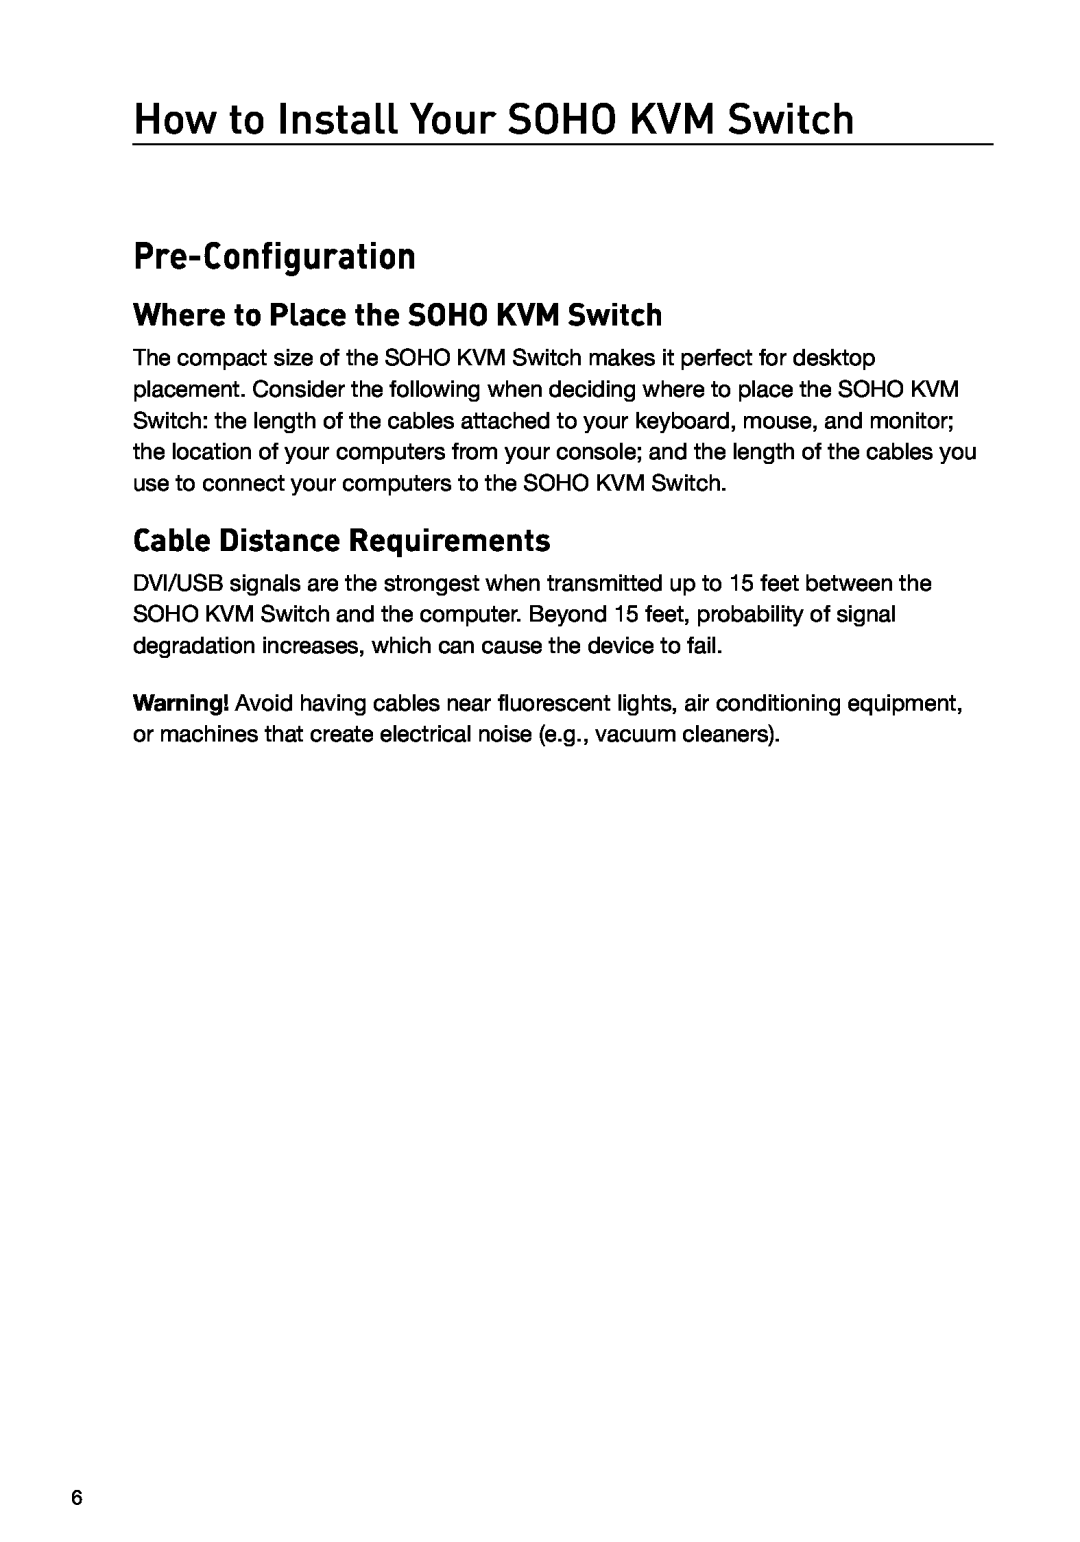 Belkin F1DD102U manual How to Install Your SOHO KVM Switch, Pre-Configuration, Where to Place the SOHO KVM Switch 